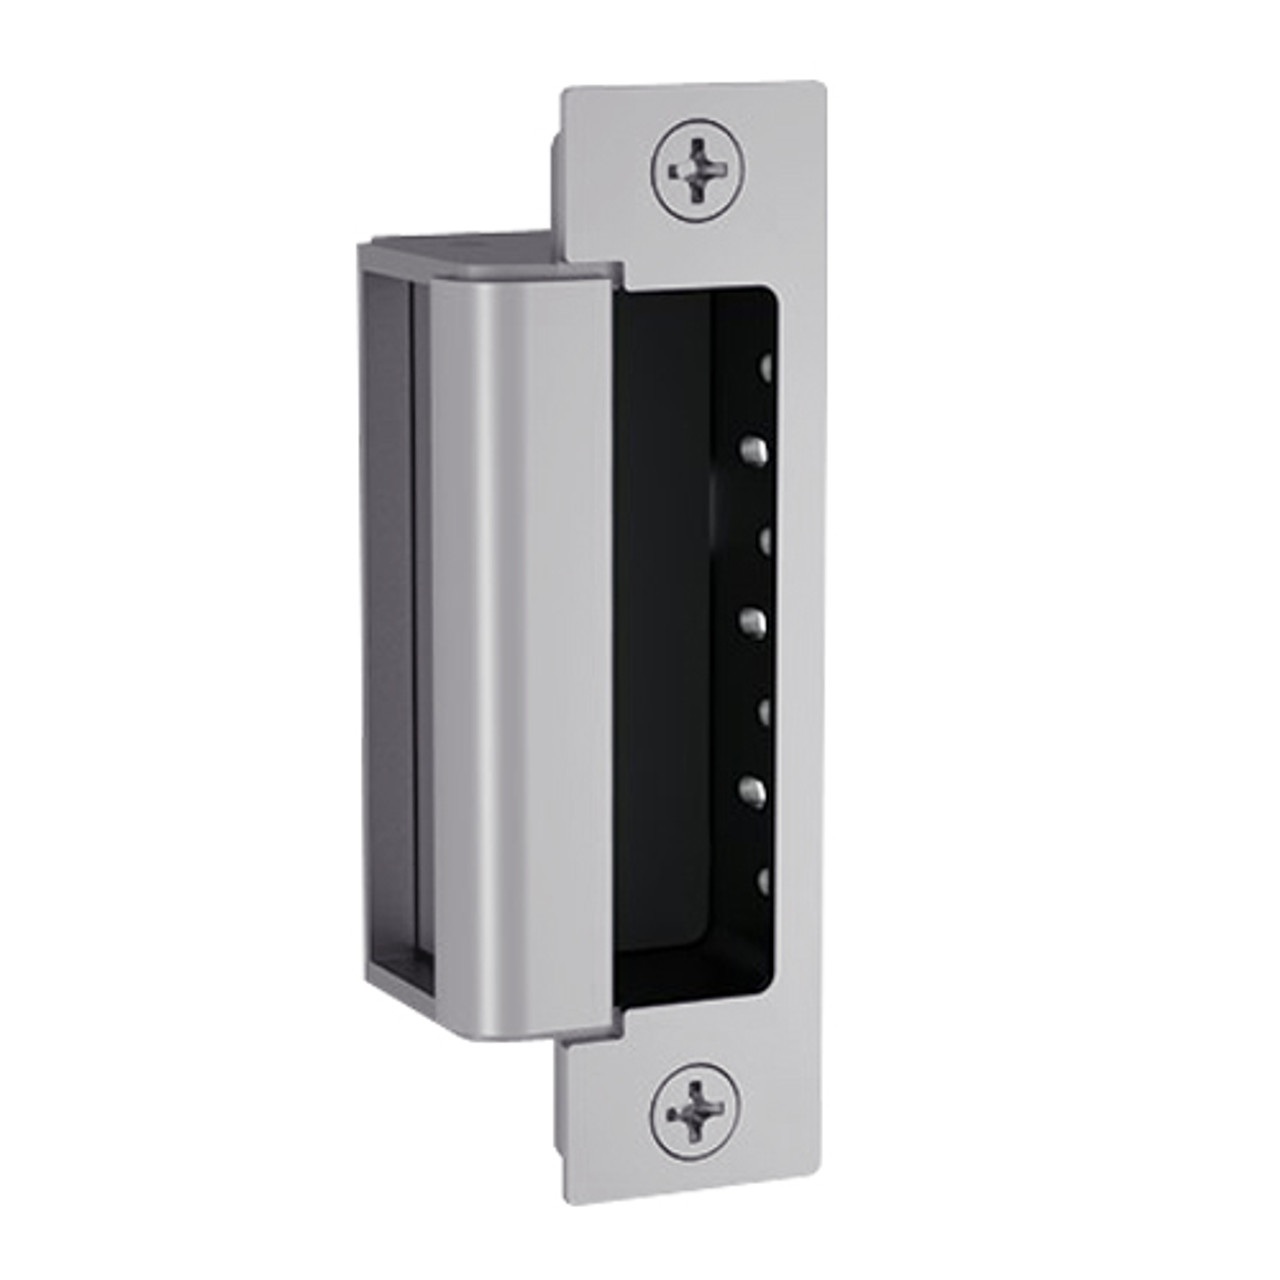 1600-LM-630 Hes 1600 Series Dynamic Low Profile Electric Strike Bodies with Lock Monitor in Satin Stainless Steel